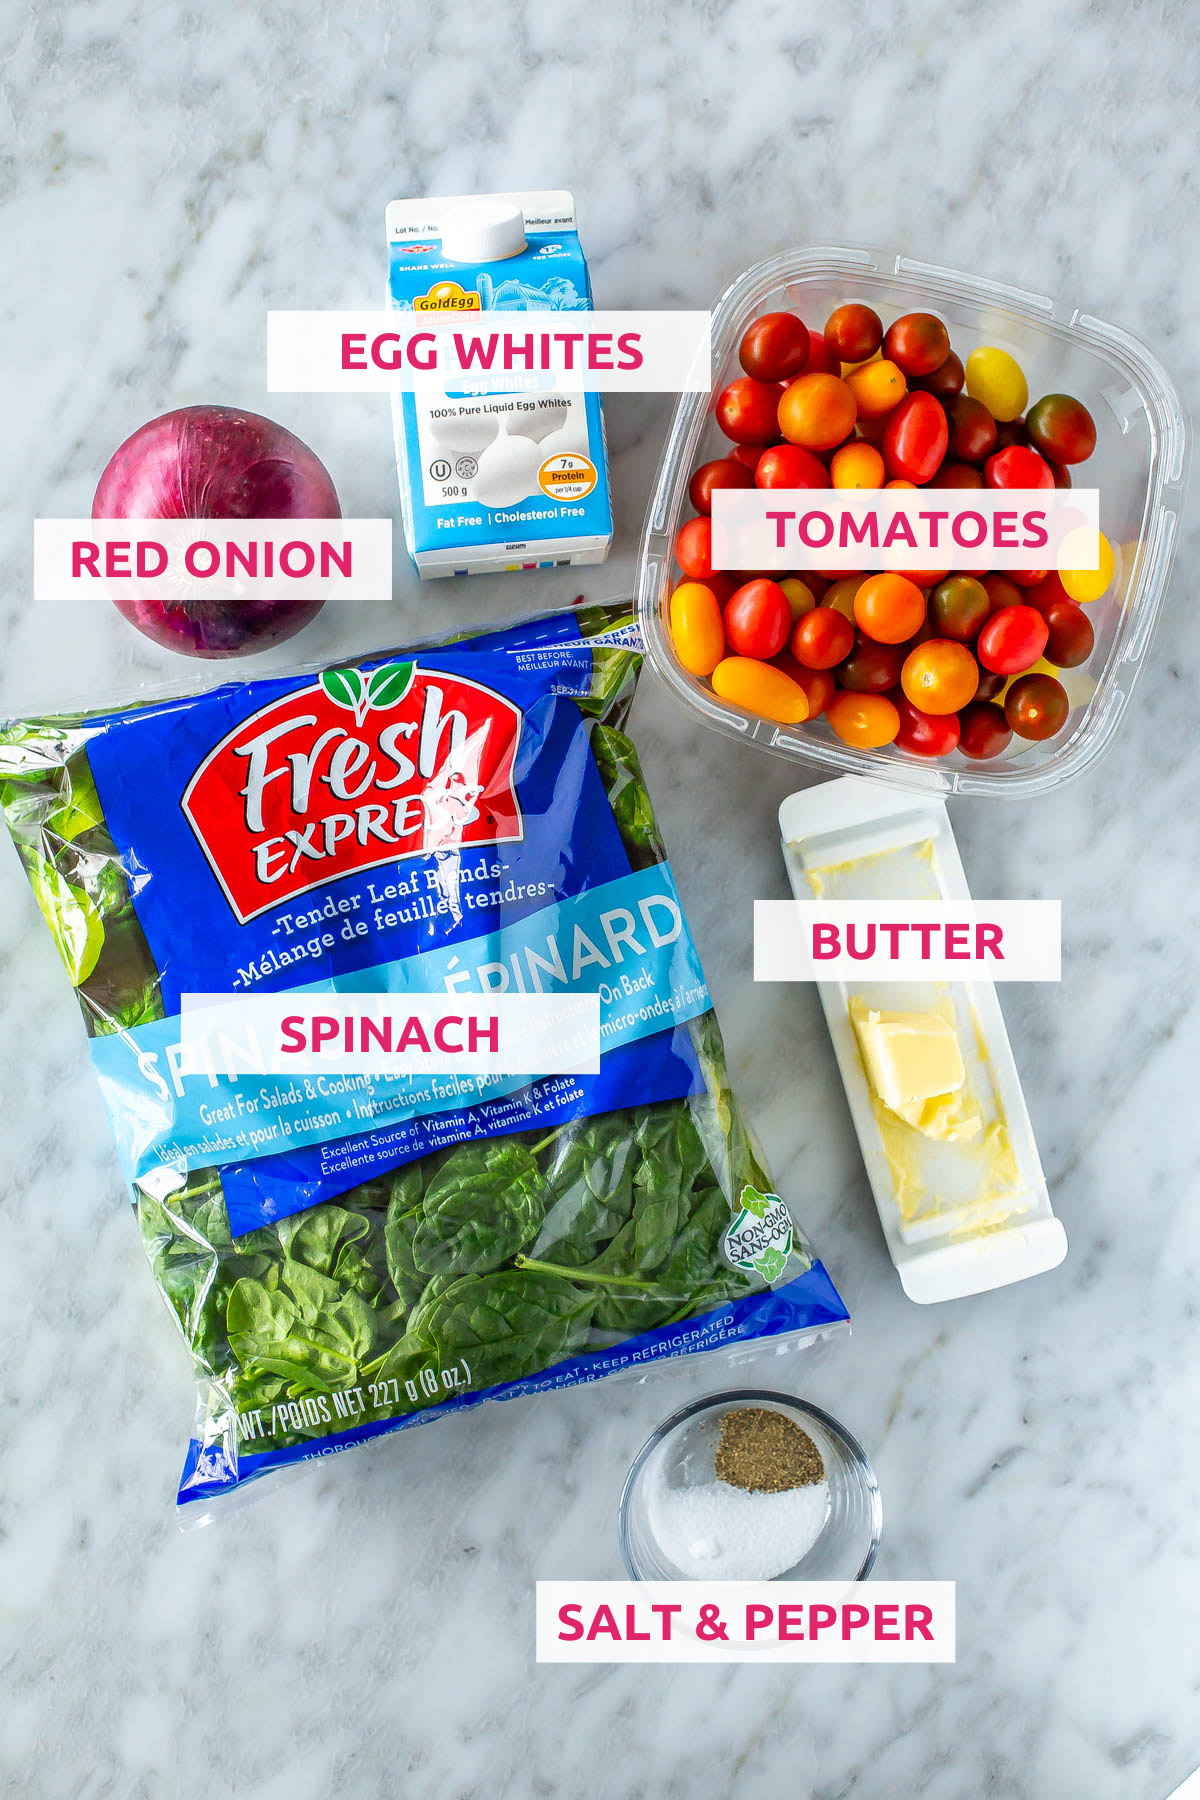 Ingredients for egg white frittata: egg whites, cherry tomatoes, red onion, spinach, butter, salt and pepper.